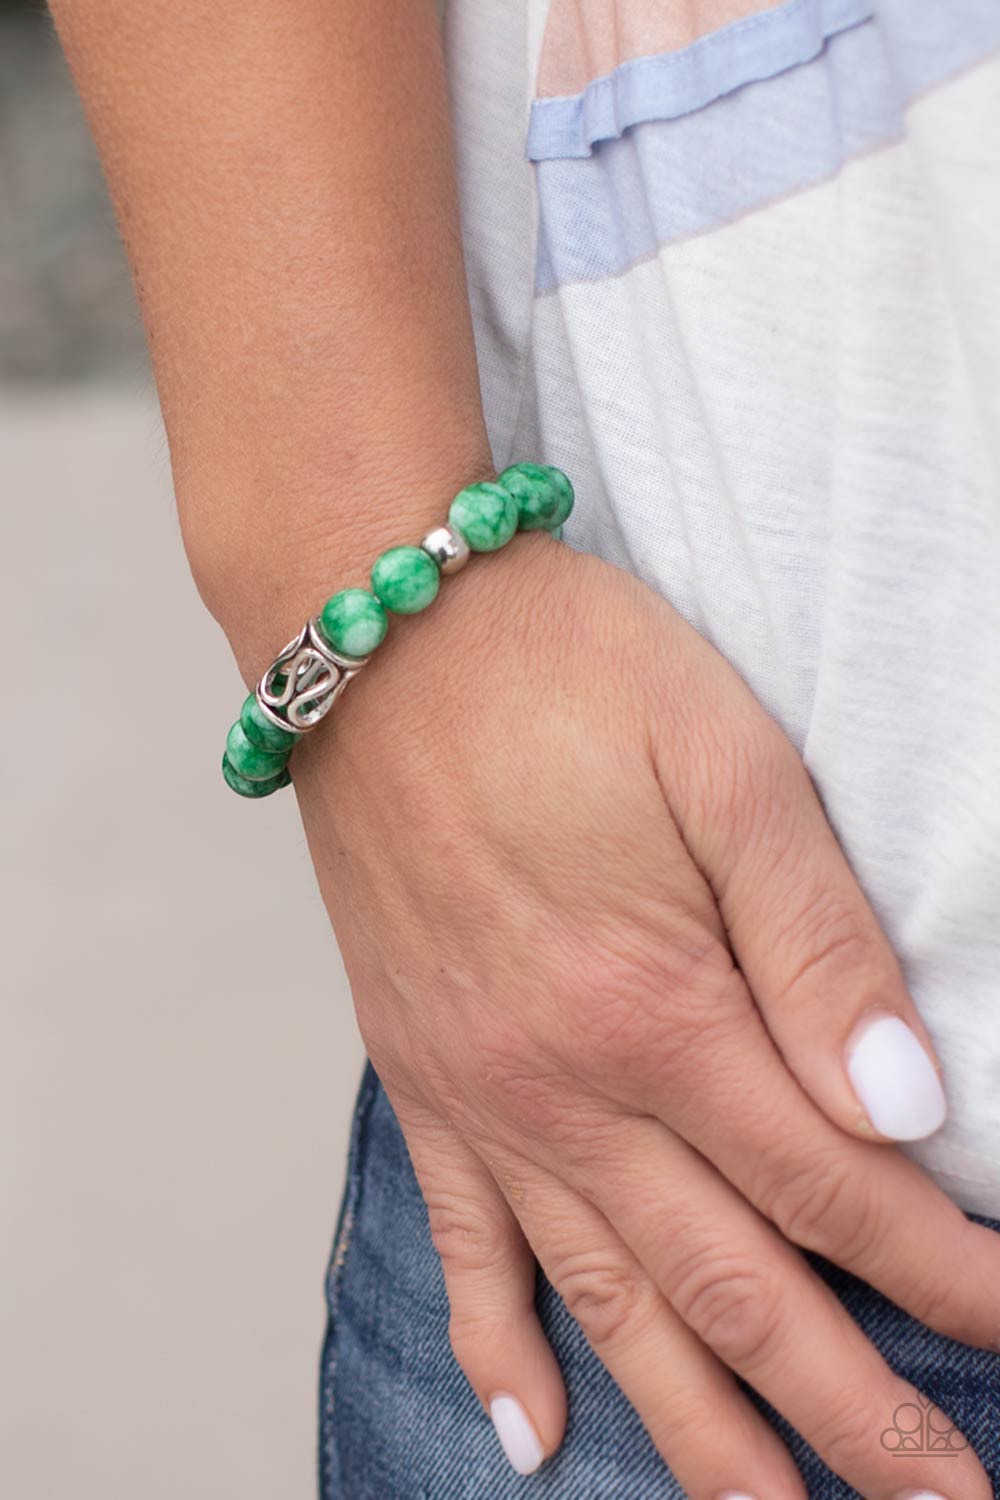 Soothes the Soul - Green Urban Bracelets infused with an ornate silver centerpiece, an earthy collection of silver and jade beads are threaded along a stretchy band around the wrist for a seasonal flair.  Sold as one individual bracelet.  Paparazzi Jewelry is lead and nickel free so it's perfect for sensitive skin too!